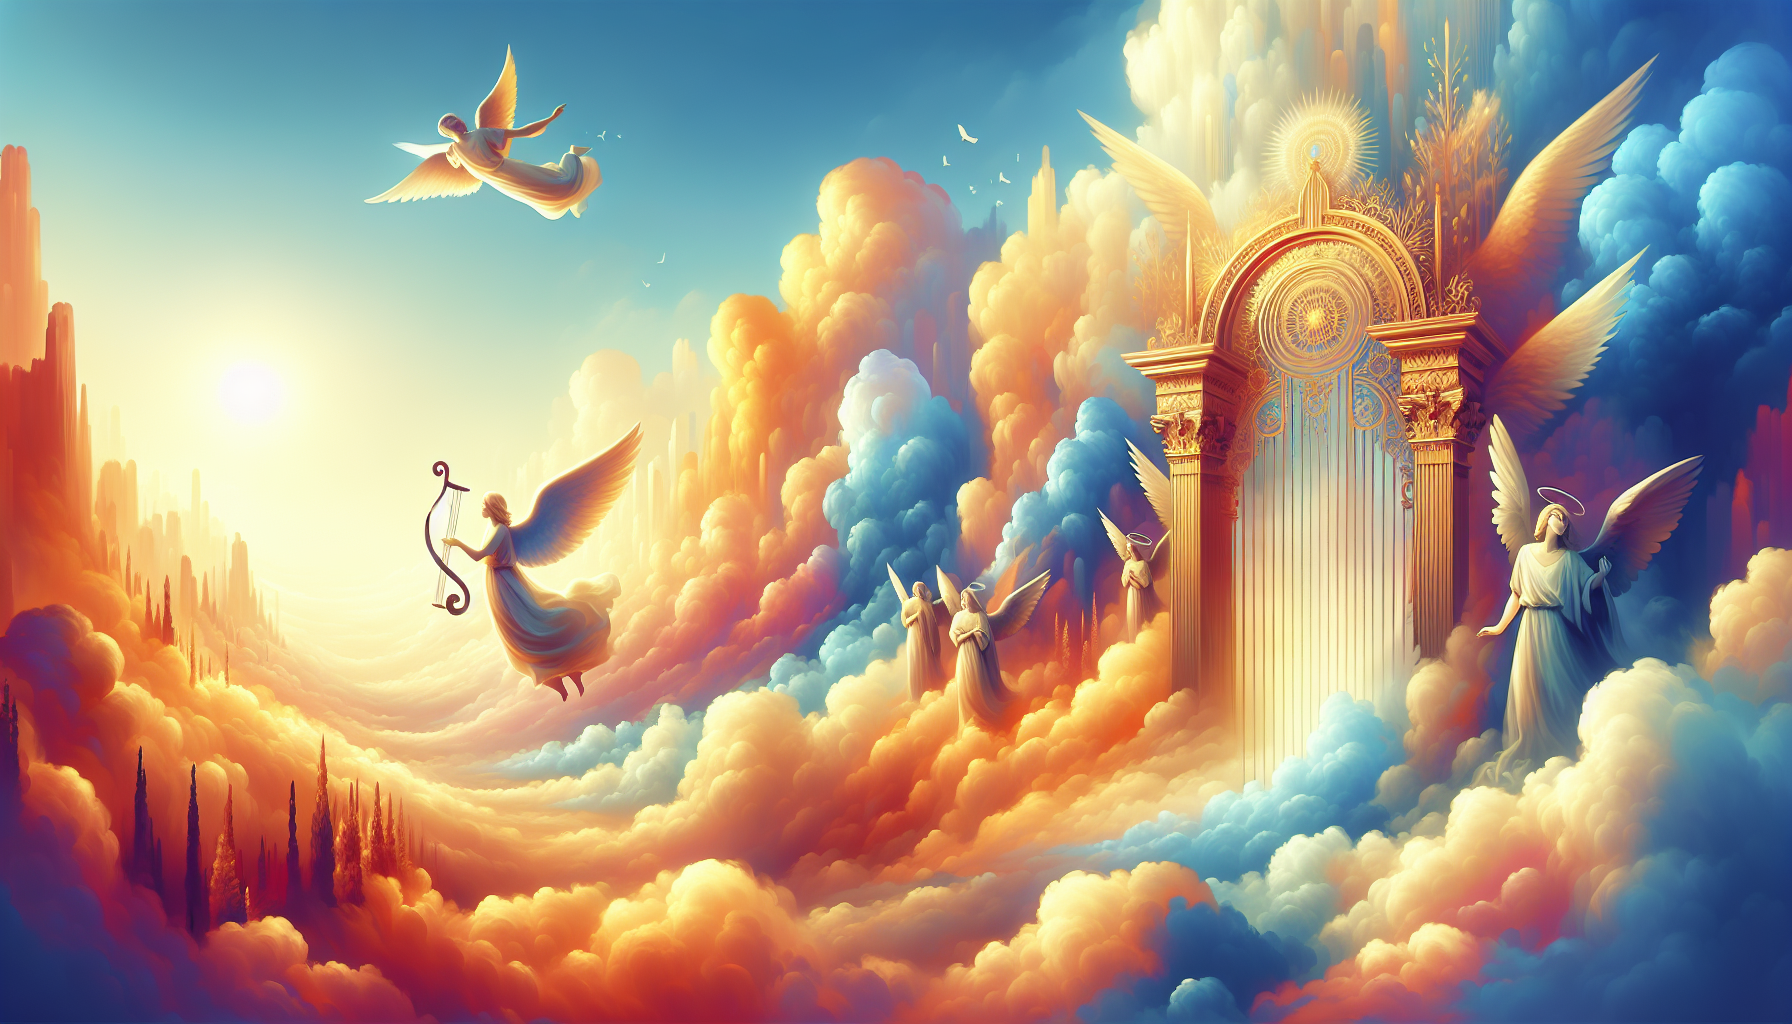 Vibrant and colorful depiction of a majestic Biblical heaven, featuring peaceful landscapes with clouds, angels playing harps, a golden gate, and serene sunshine illuminating the scene.